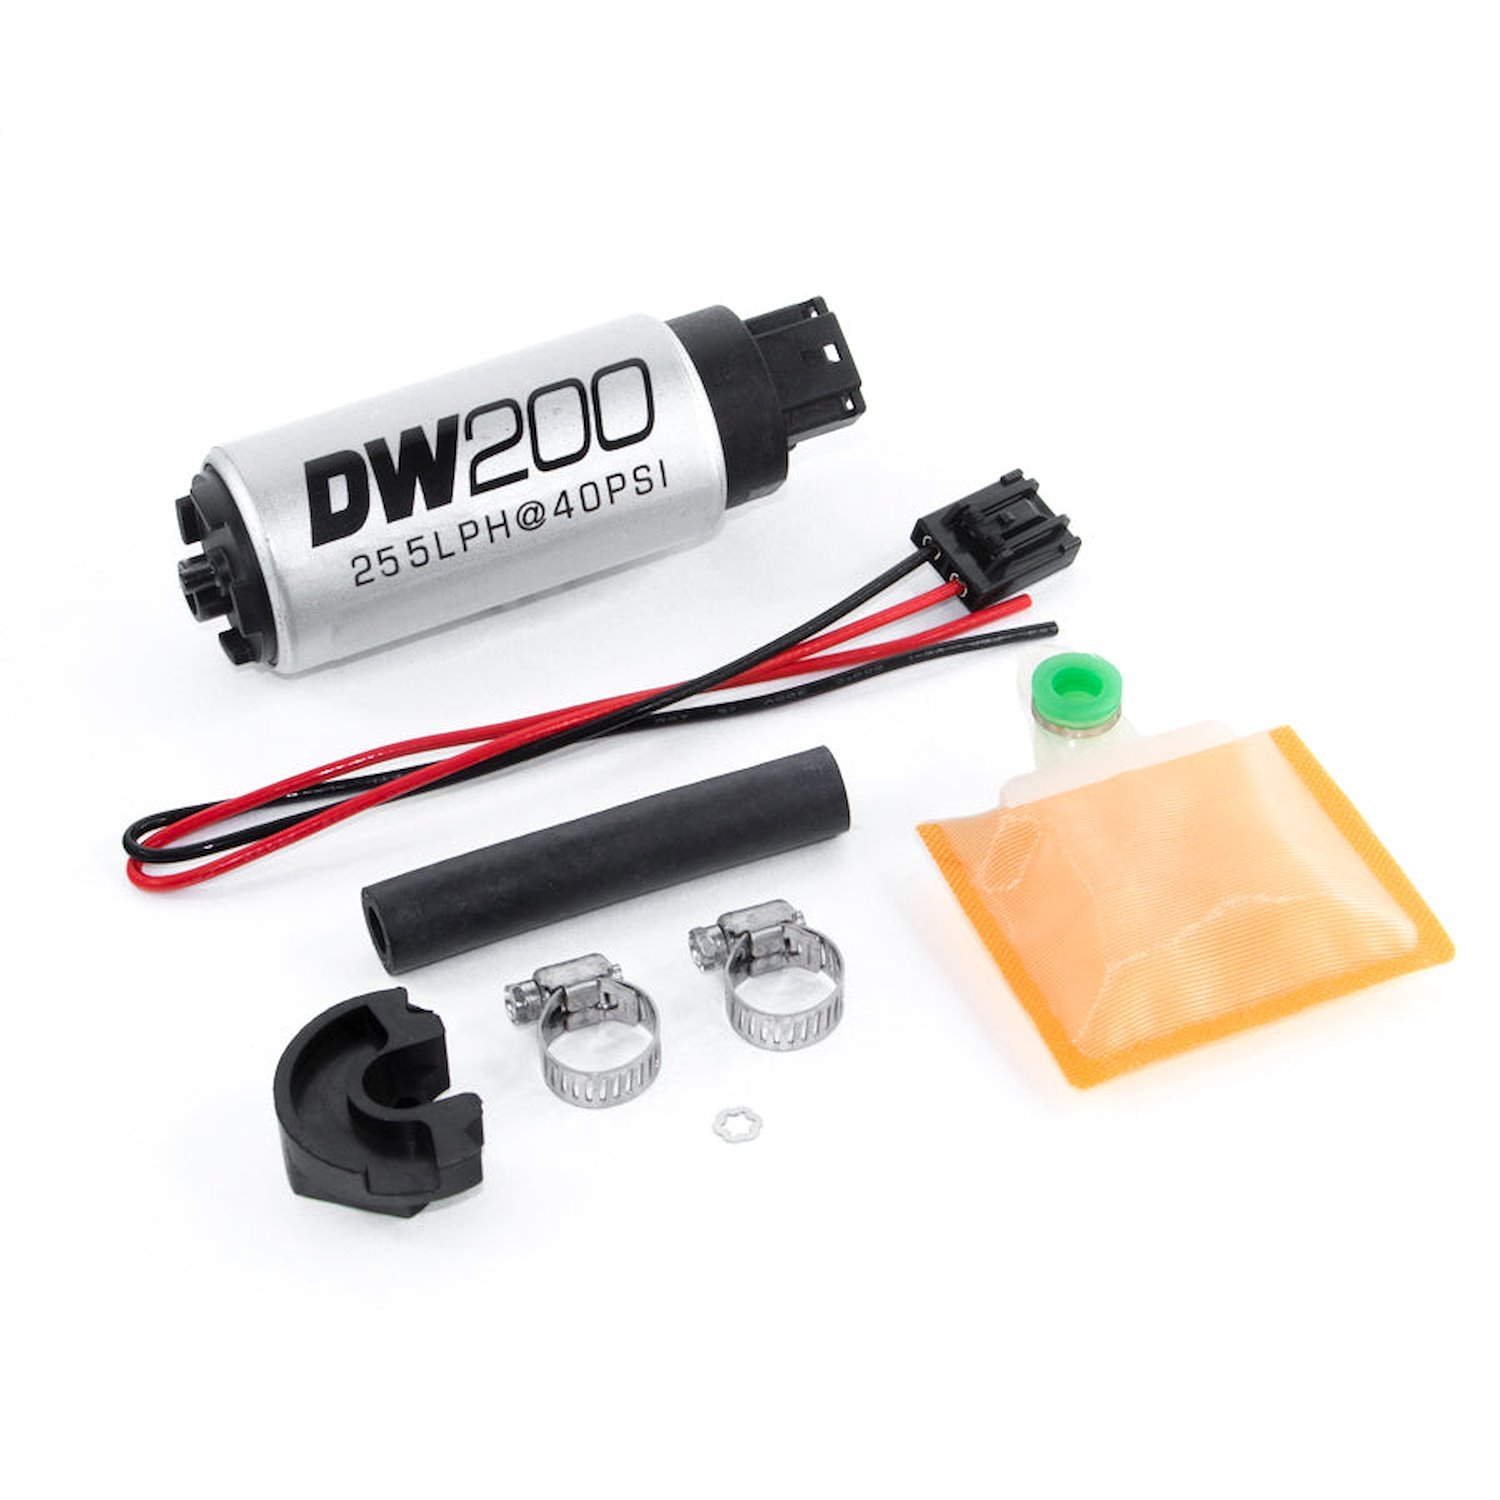 92010766 DW200 series 255lph in-tank fuel pump w/ install kit for 240sx 89-94 and 89-93 Nissan Skyline R32 Non-GTR